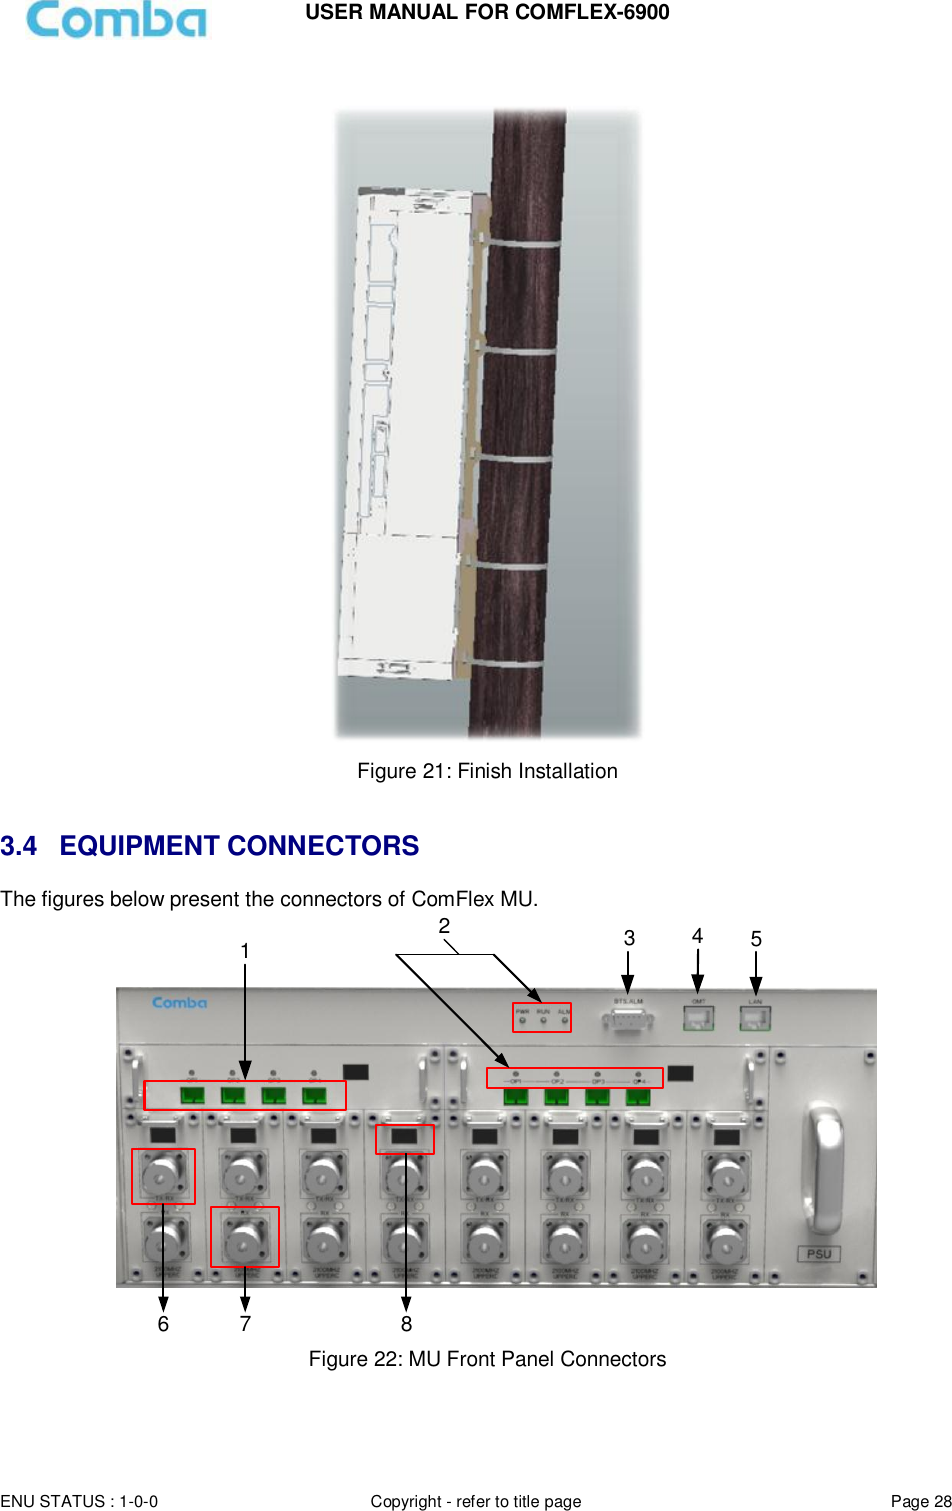 Page 28 of Comba Telecom COMFLEX-6900 ComFlex Series Distributed Antenna System User Manual 